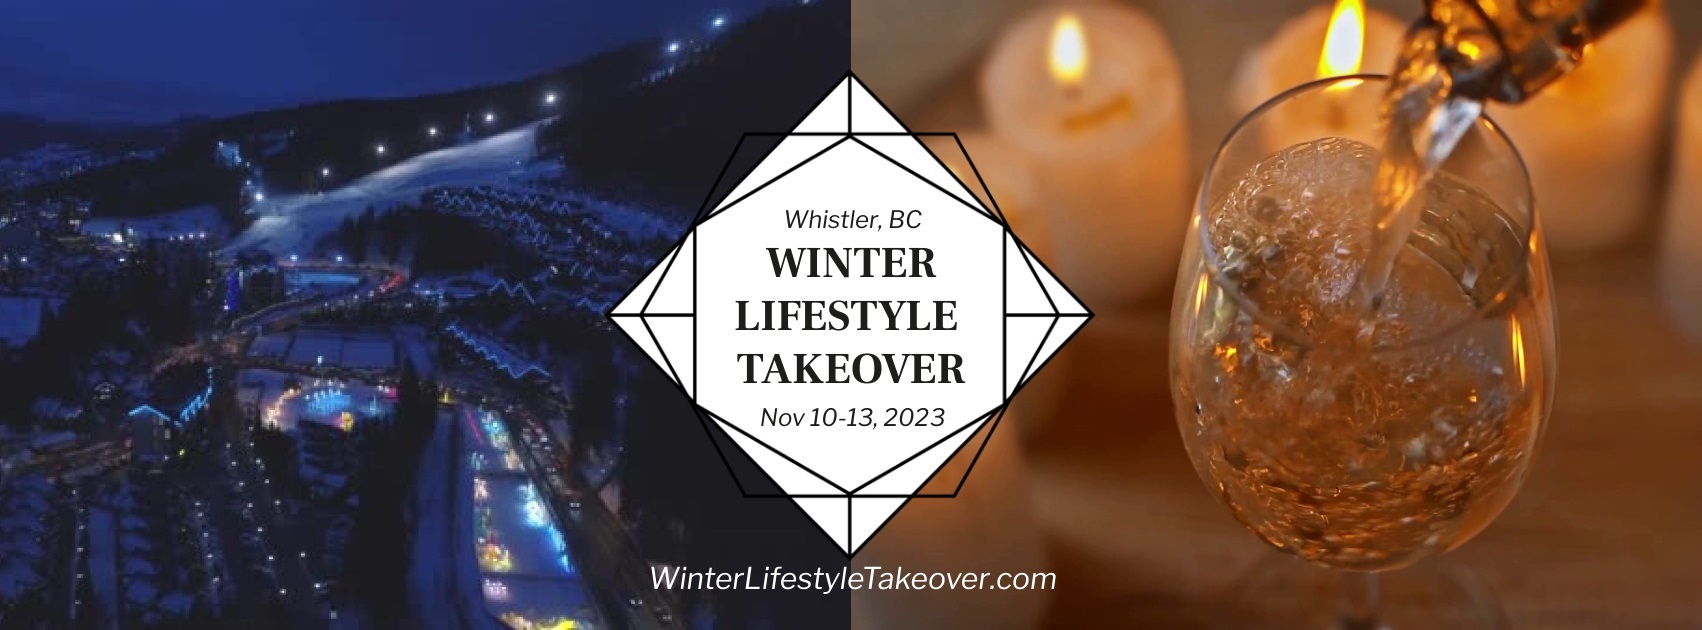 WINTER LIFESTYLE TAKEOVER